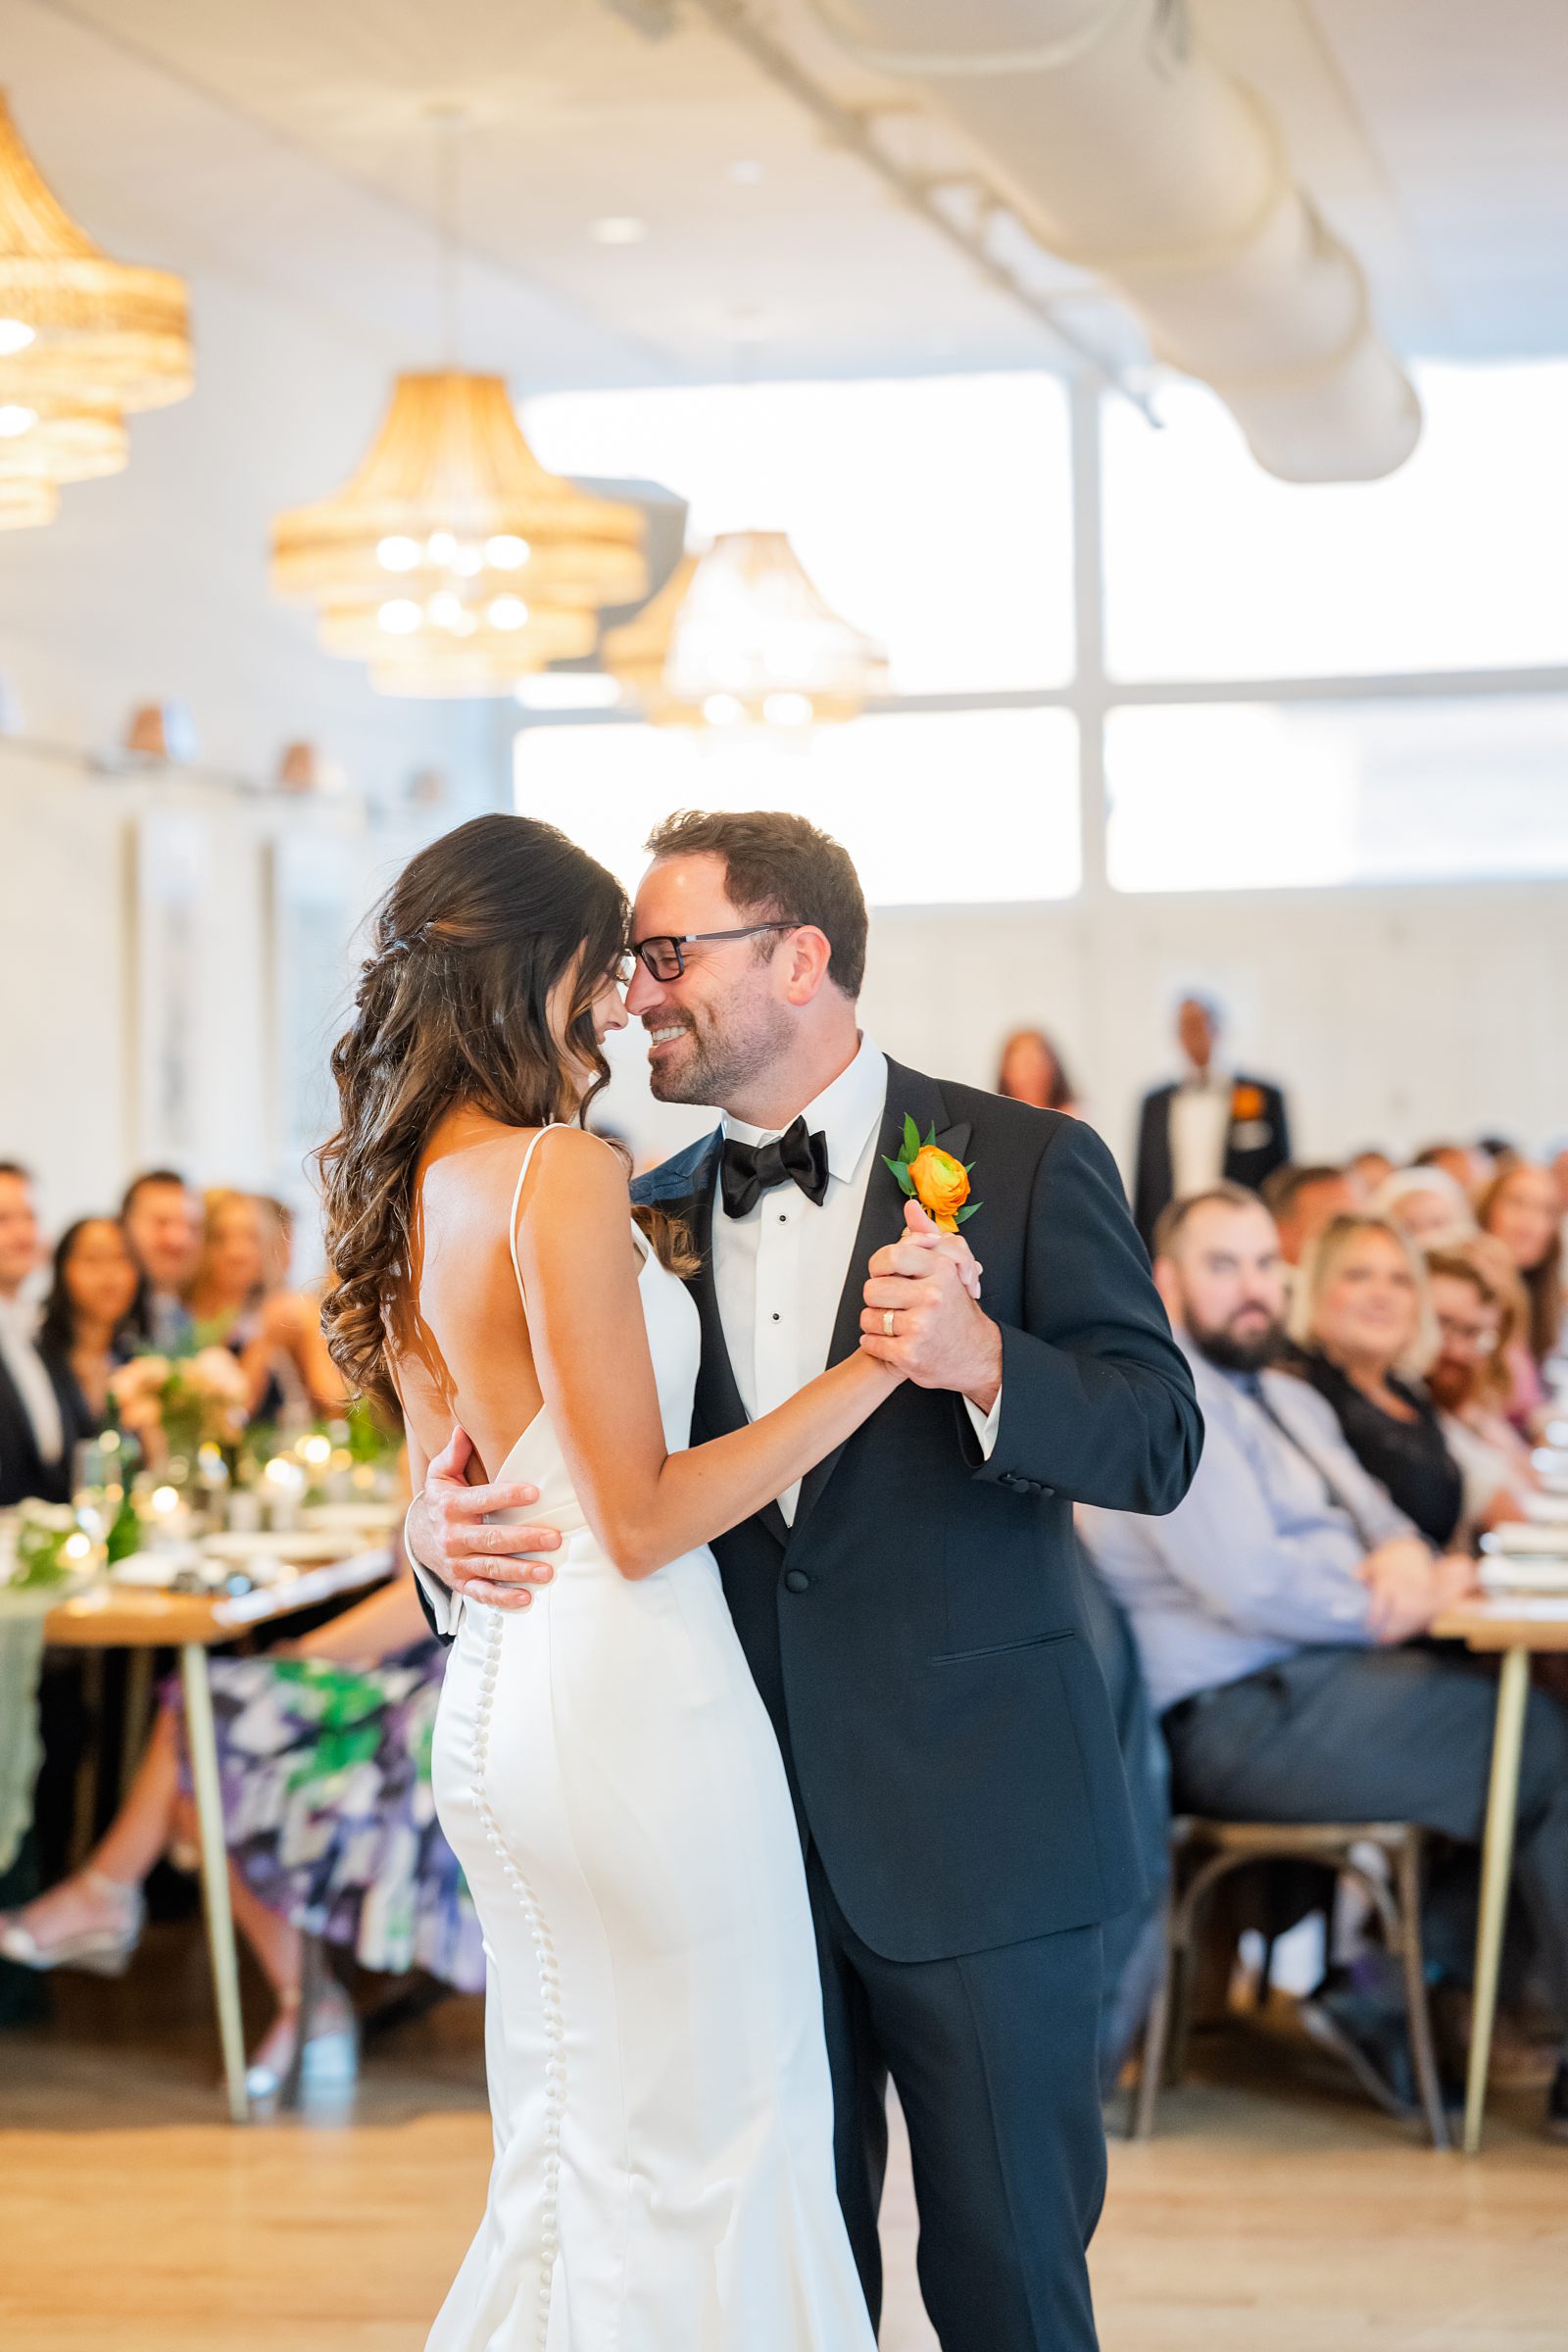 Bride and Groom First Dance at Common House Richmond Wedding Reception